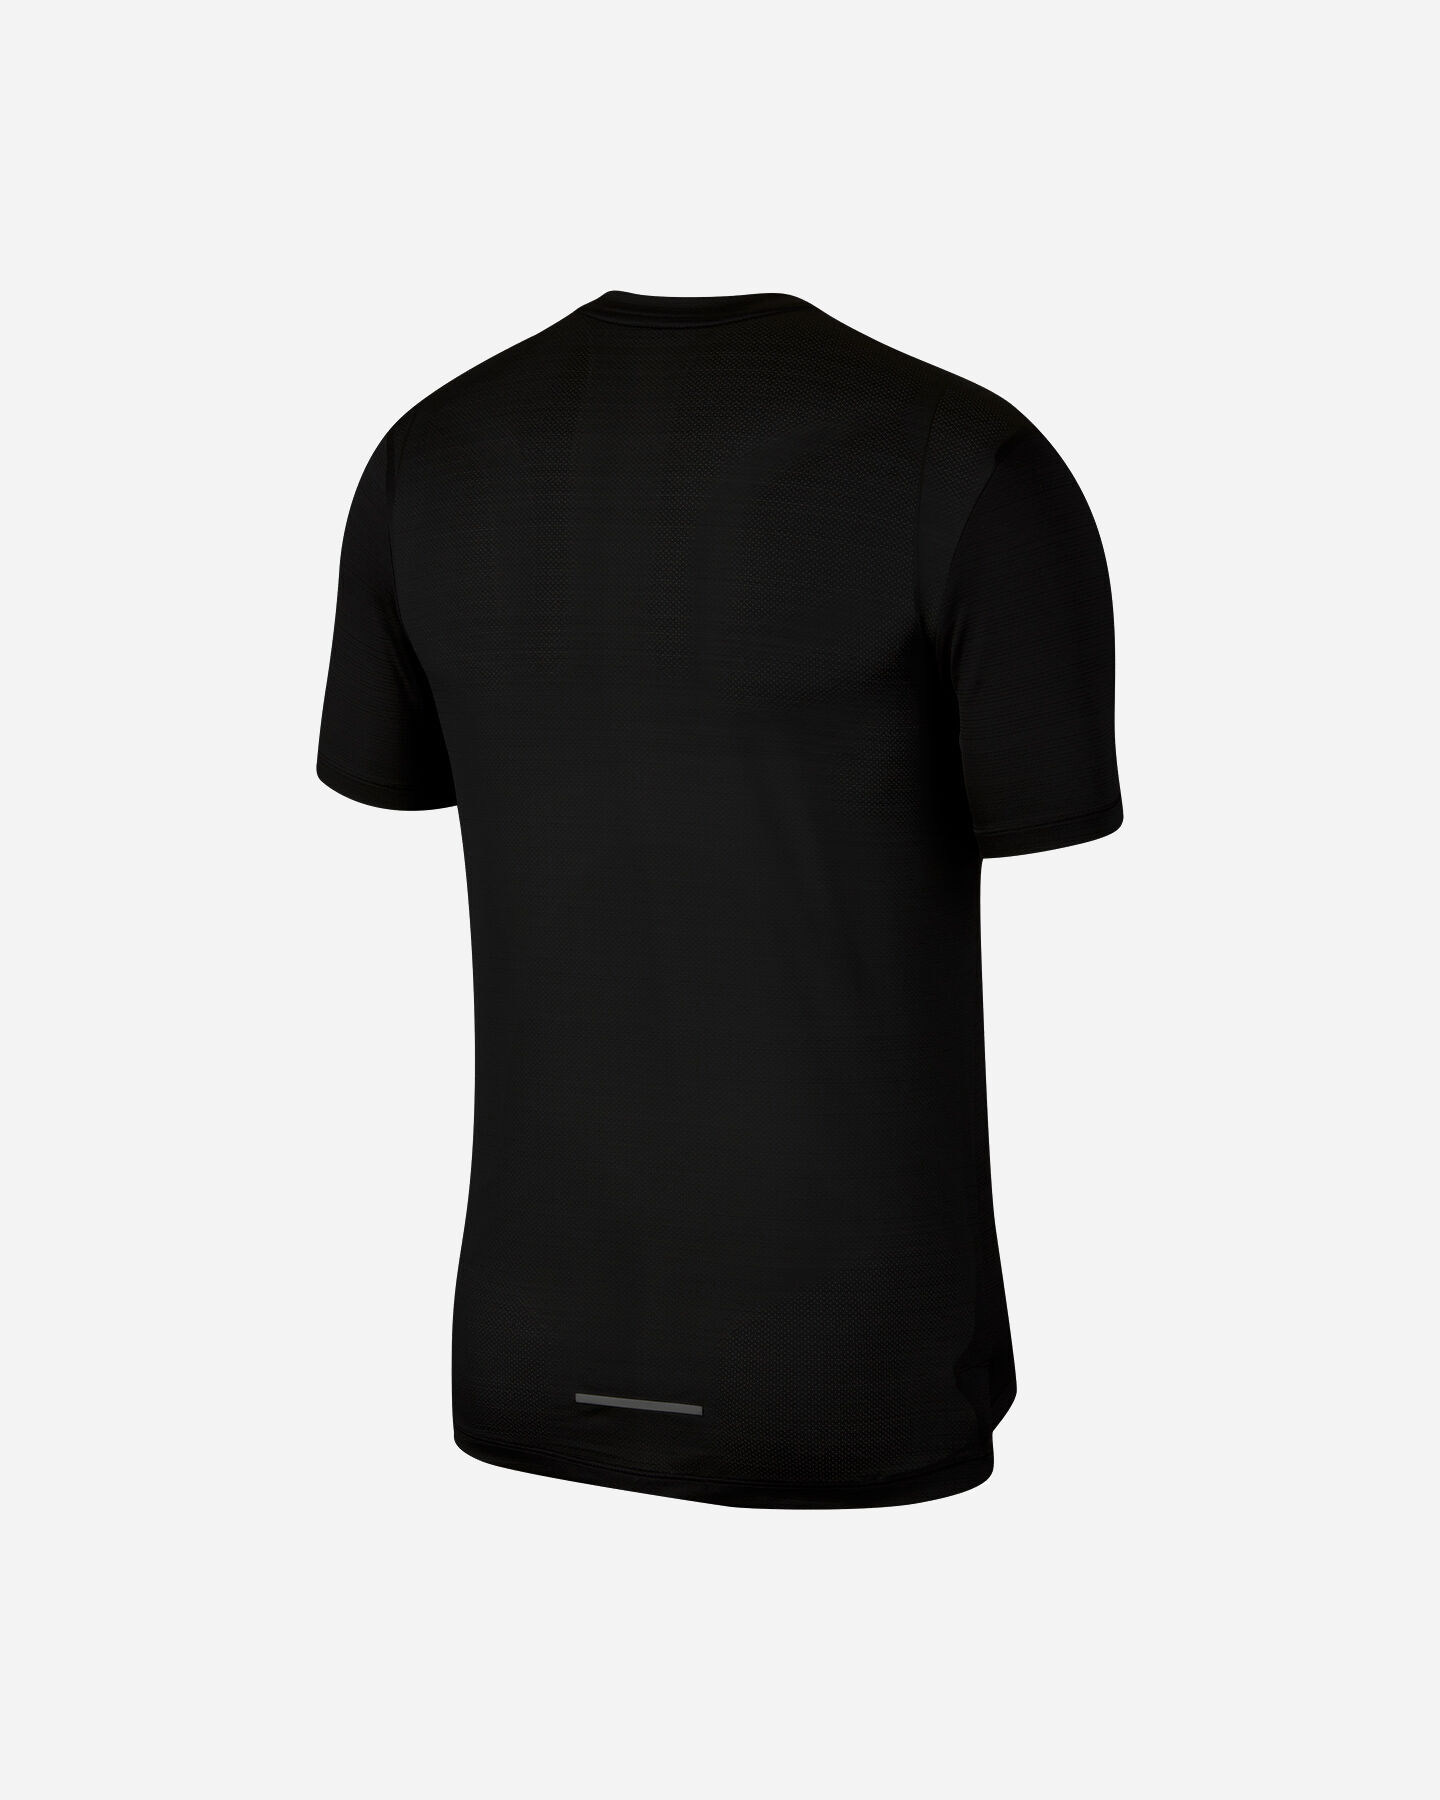  T-Shirt running NIKE DRI-FIT MILER M S5164391|010|S scatto 1